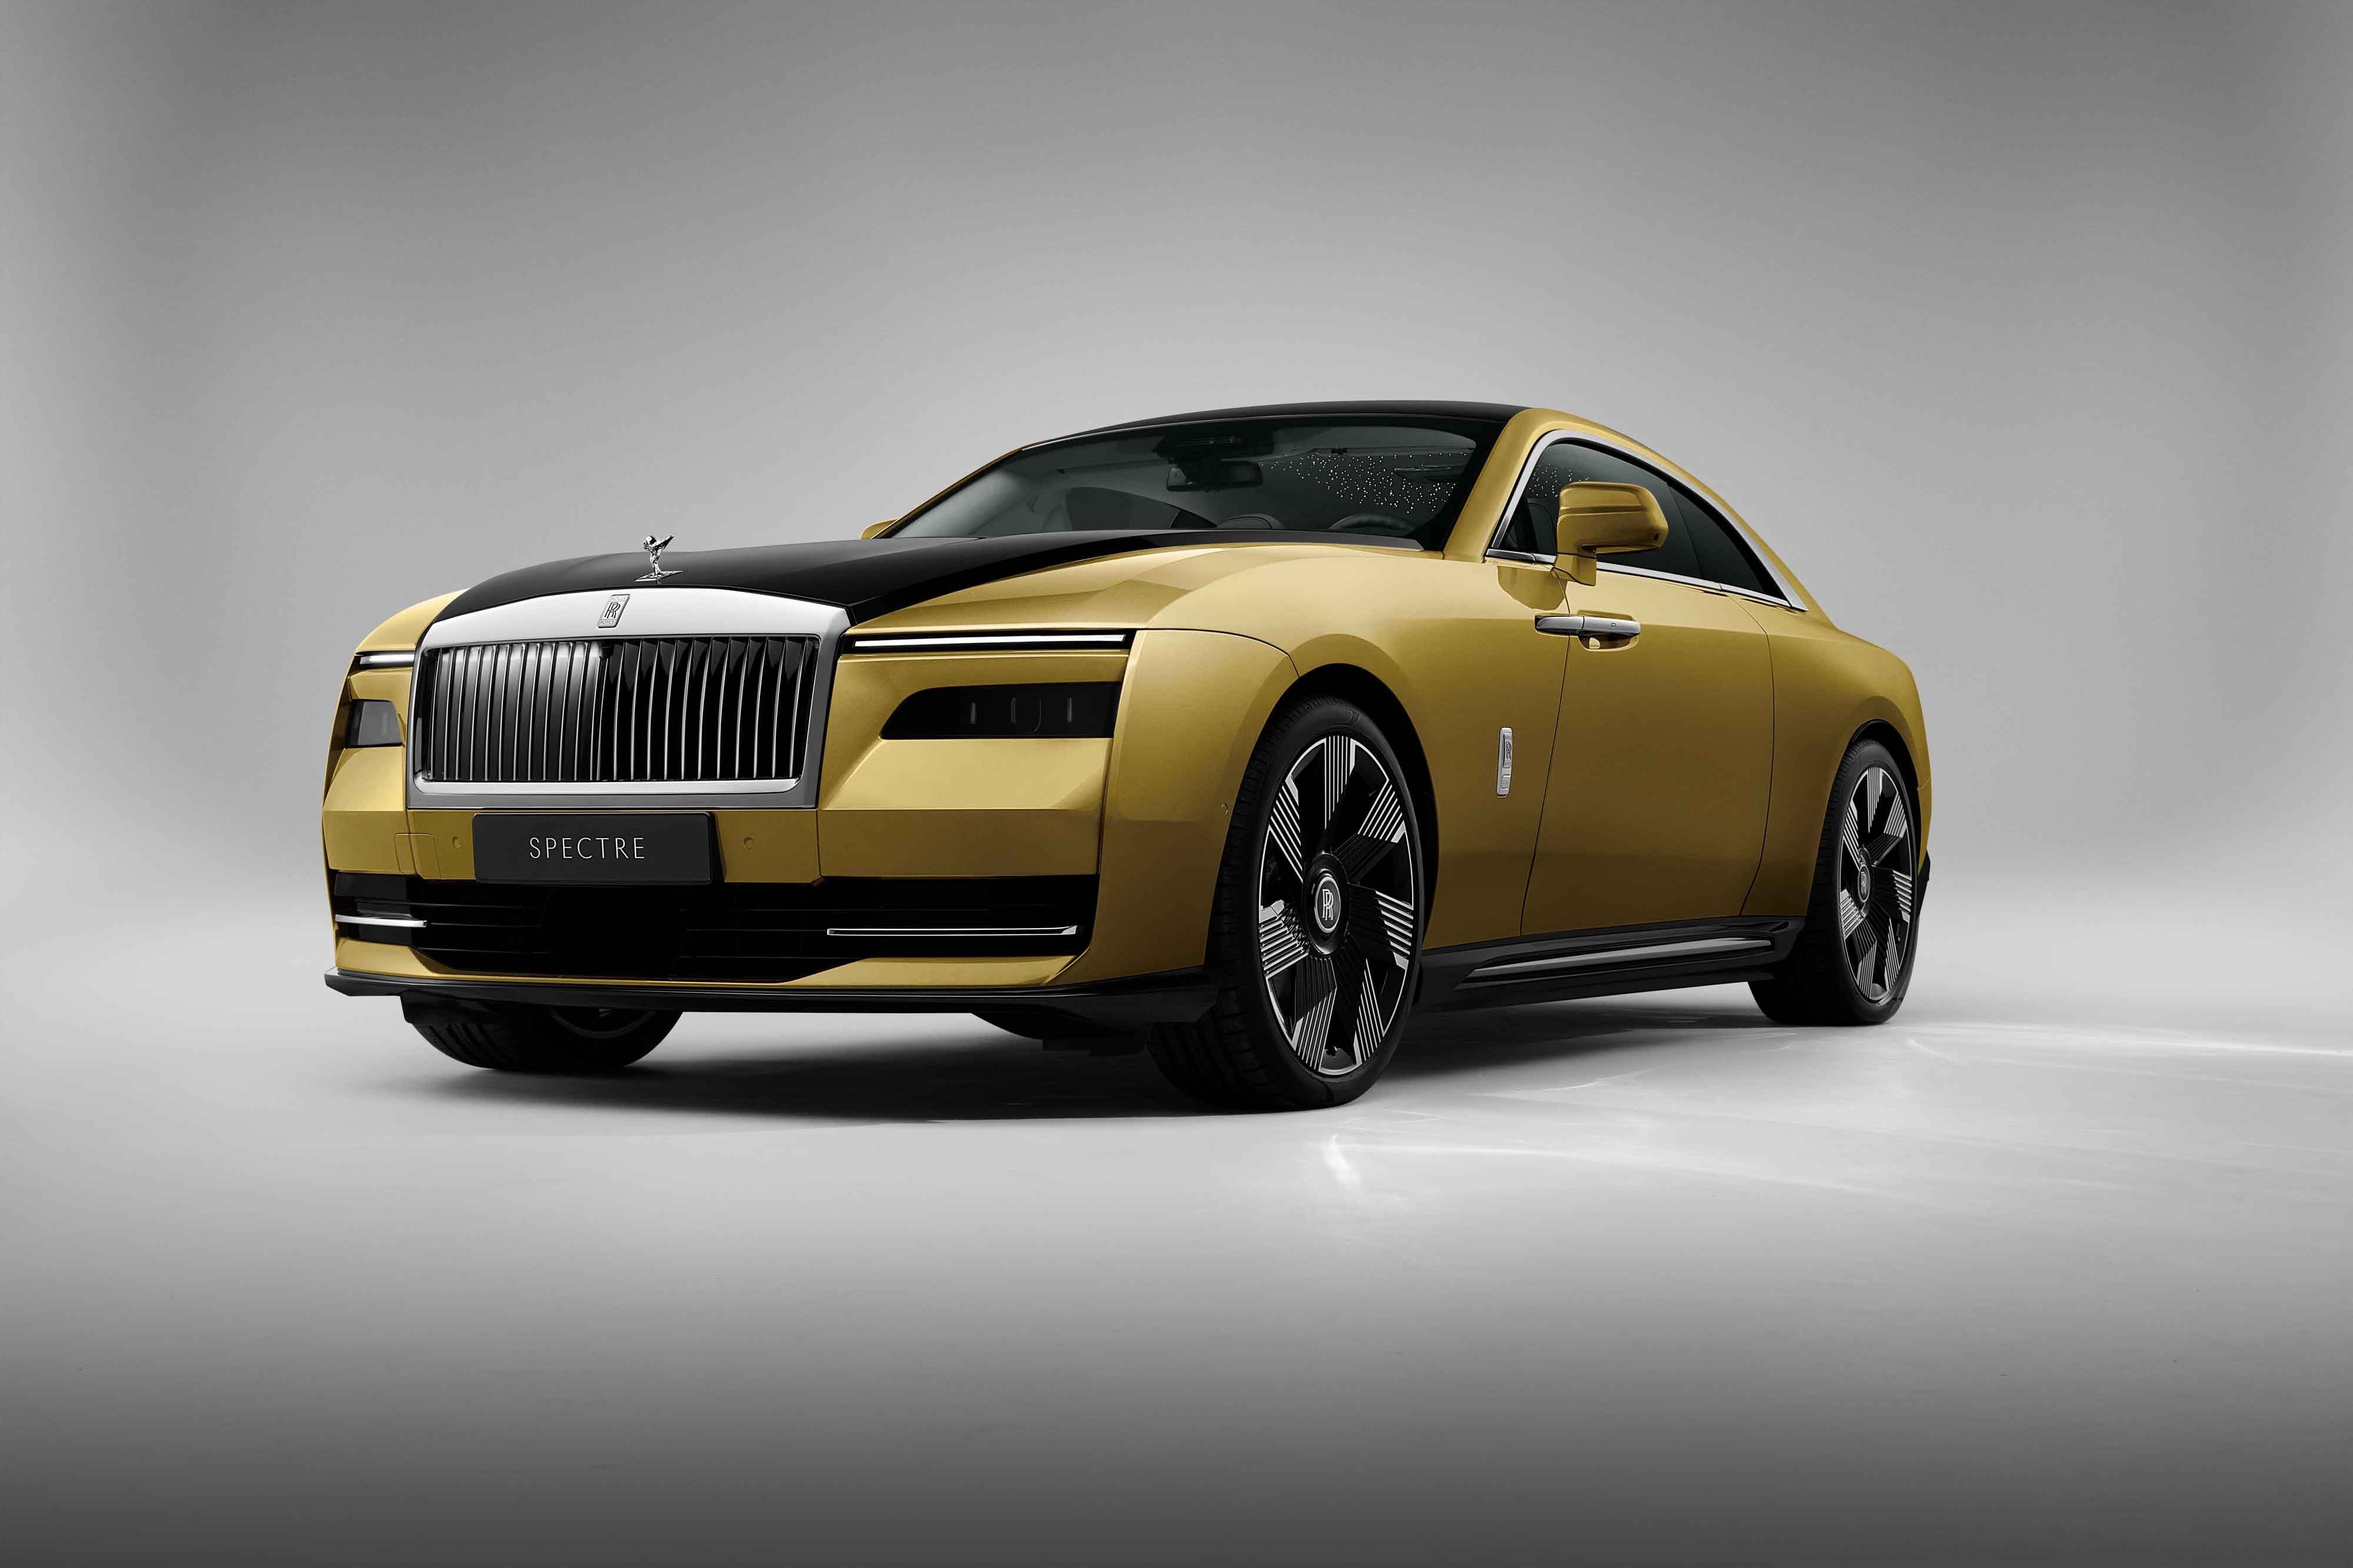 The future in the making RollsRoyce 103EX Vision Next 100